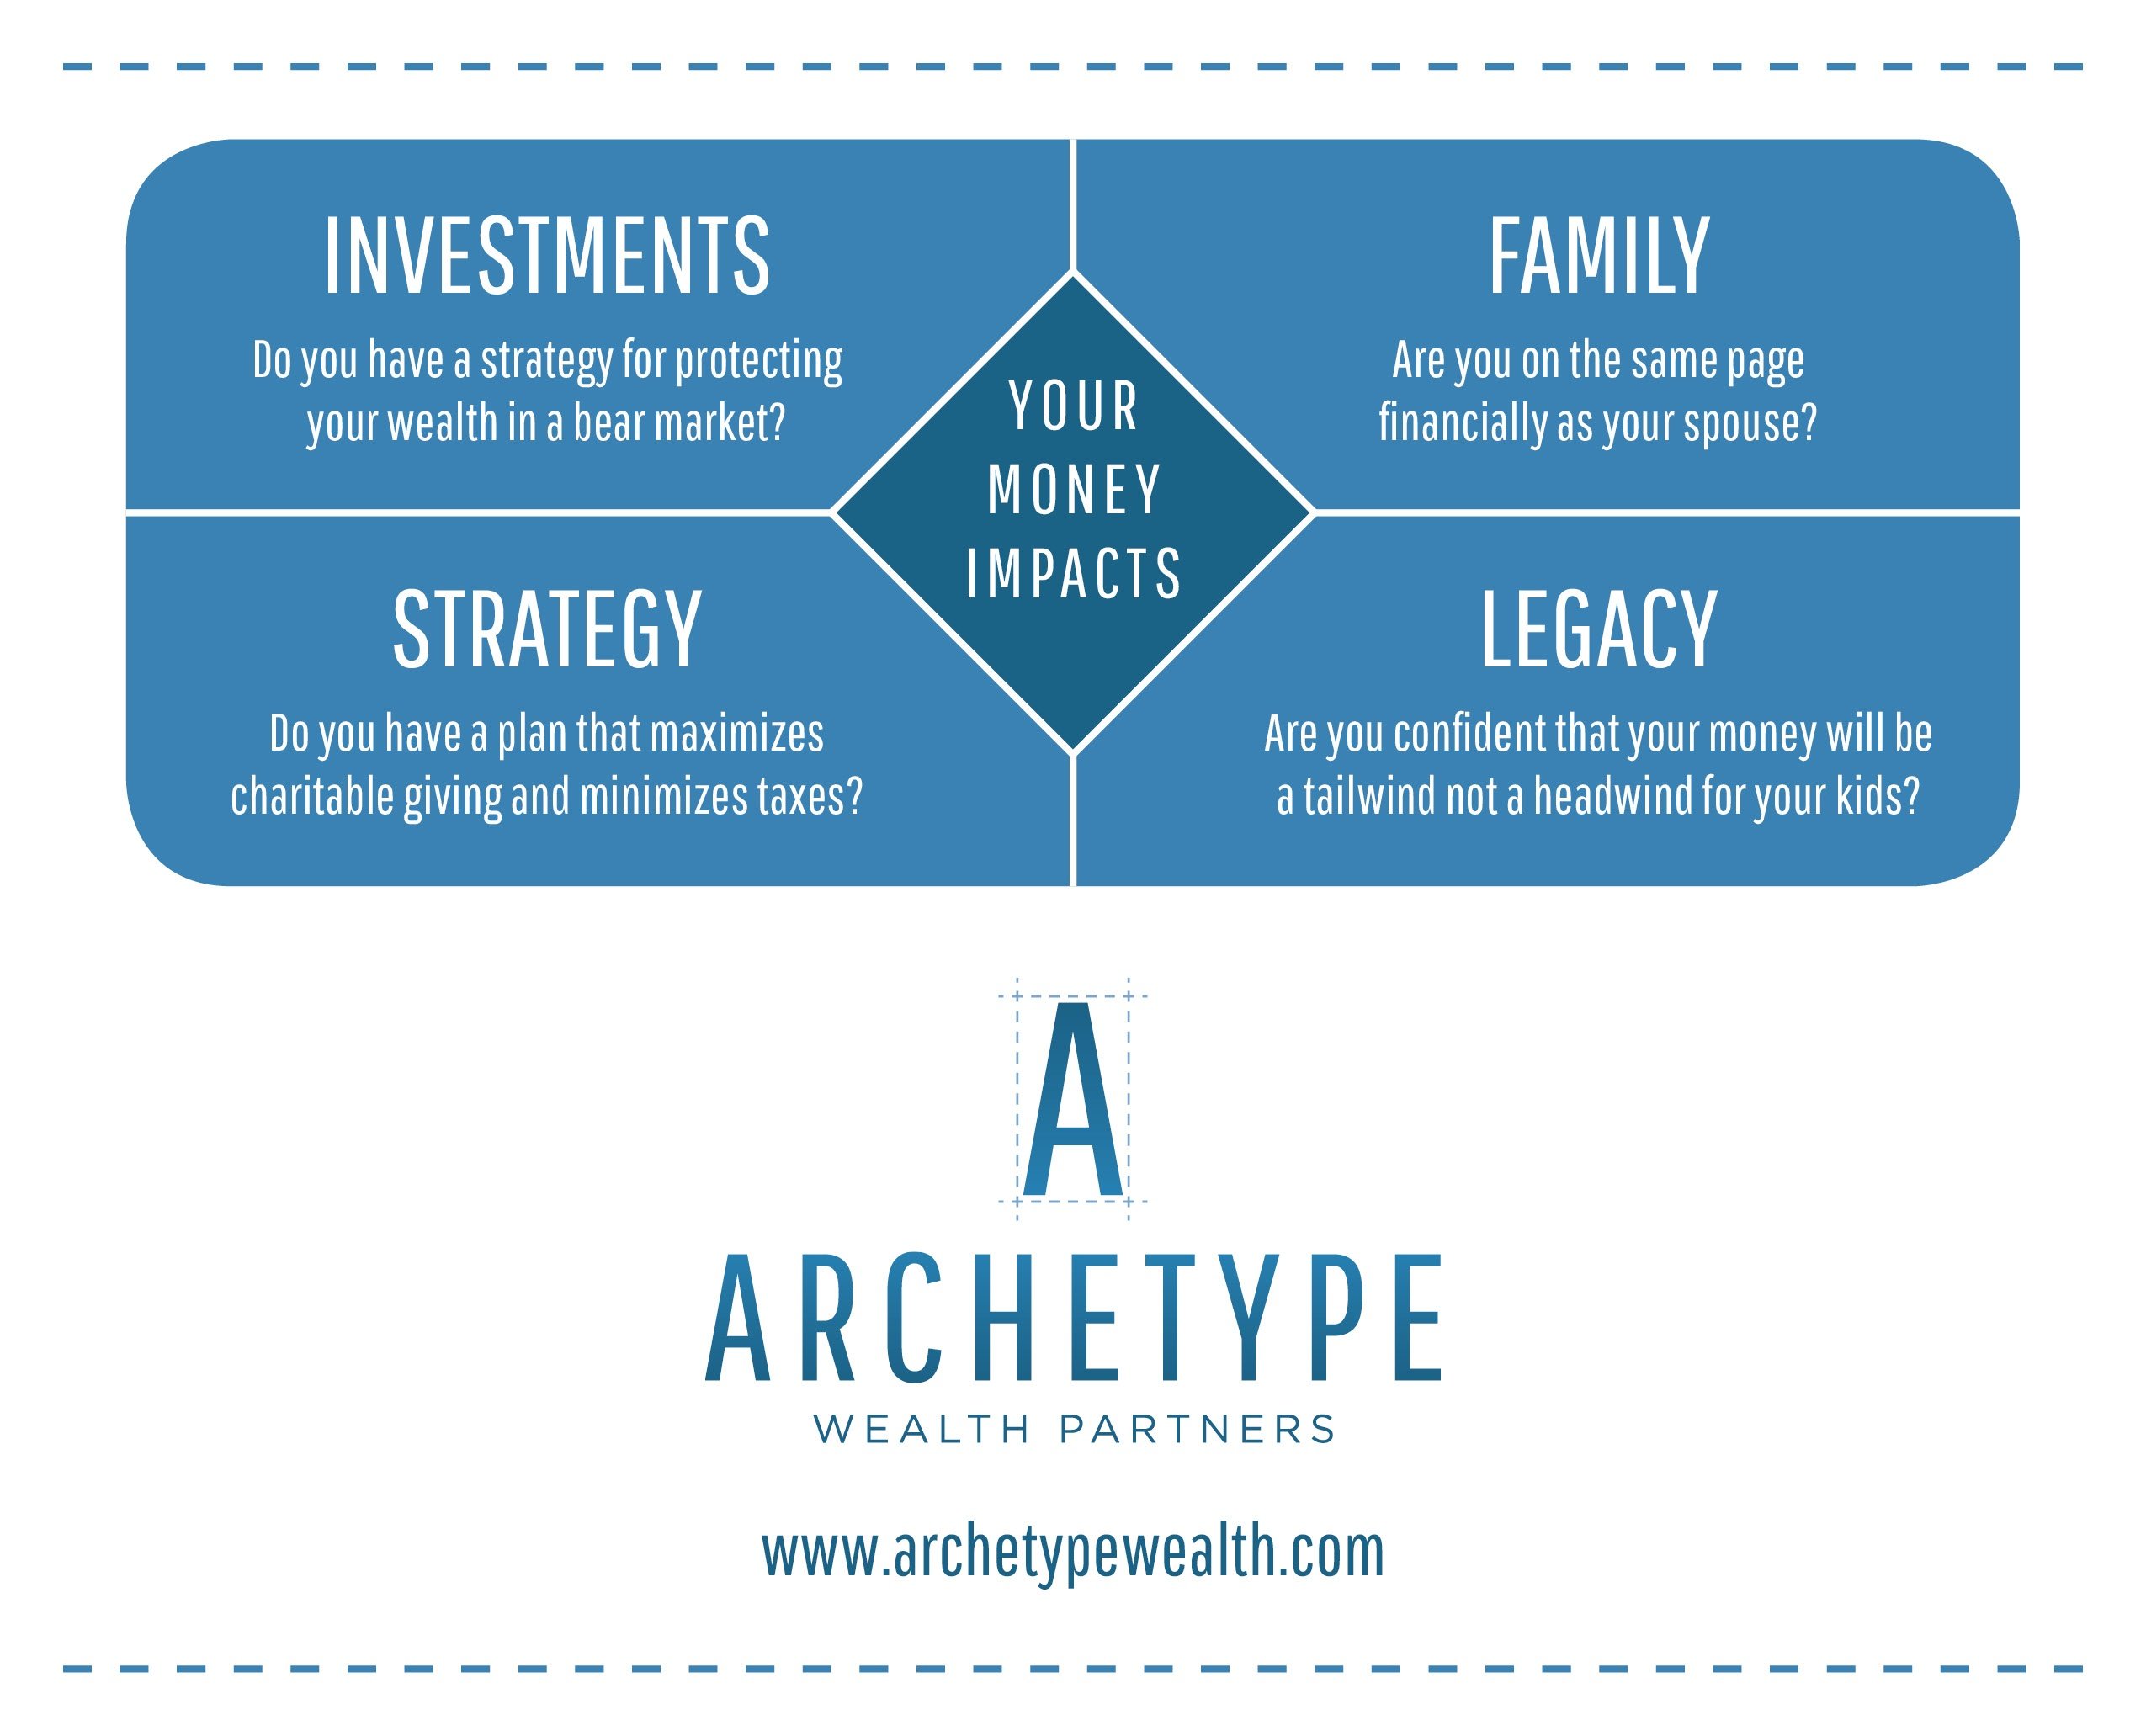 Your Money Impacts 4 Key Areas